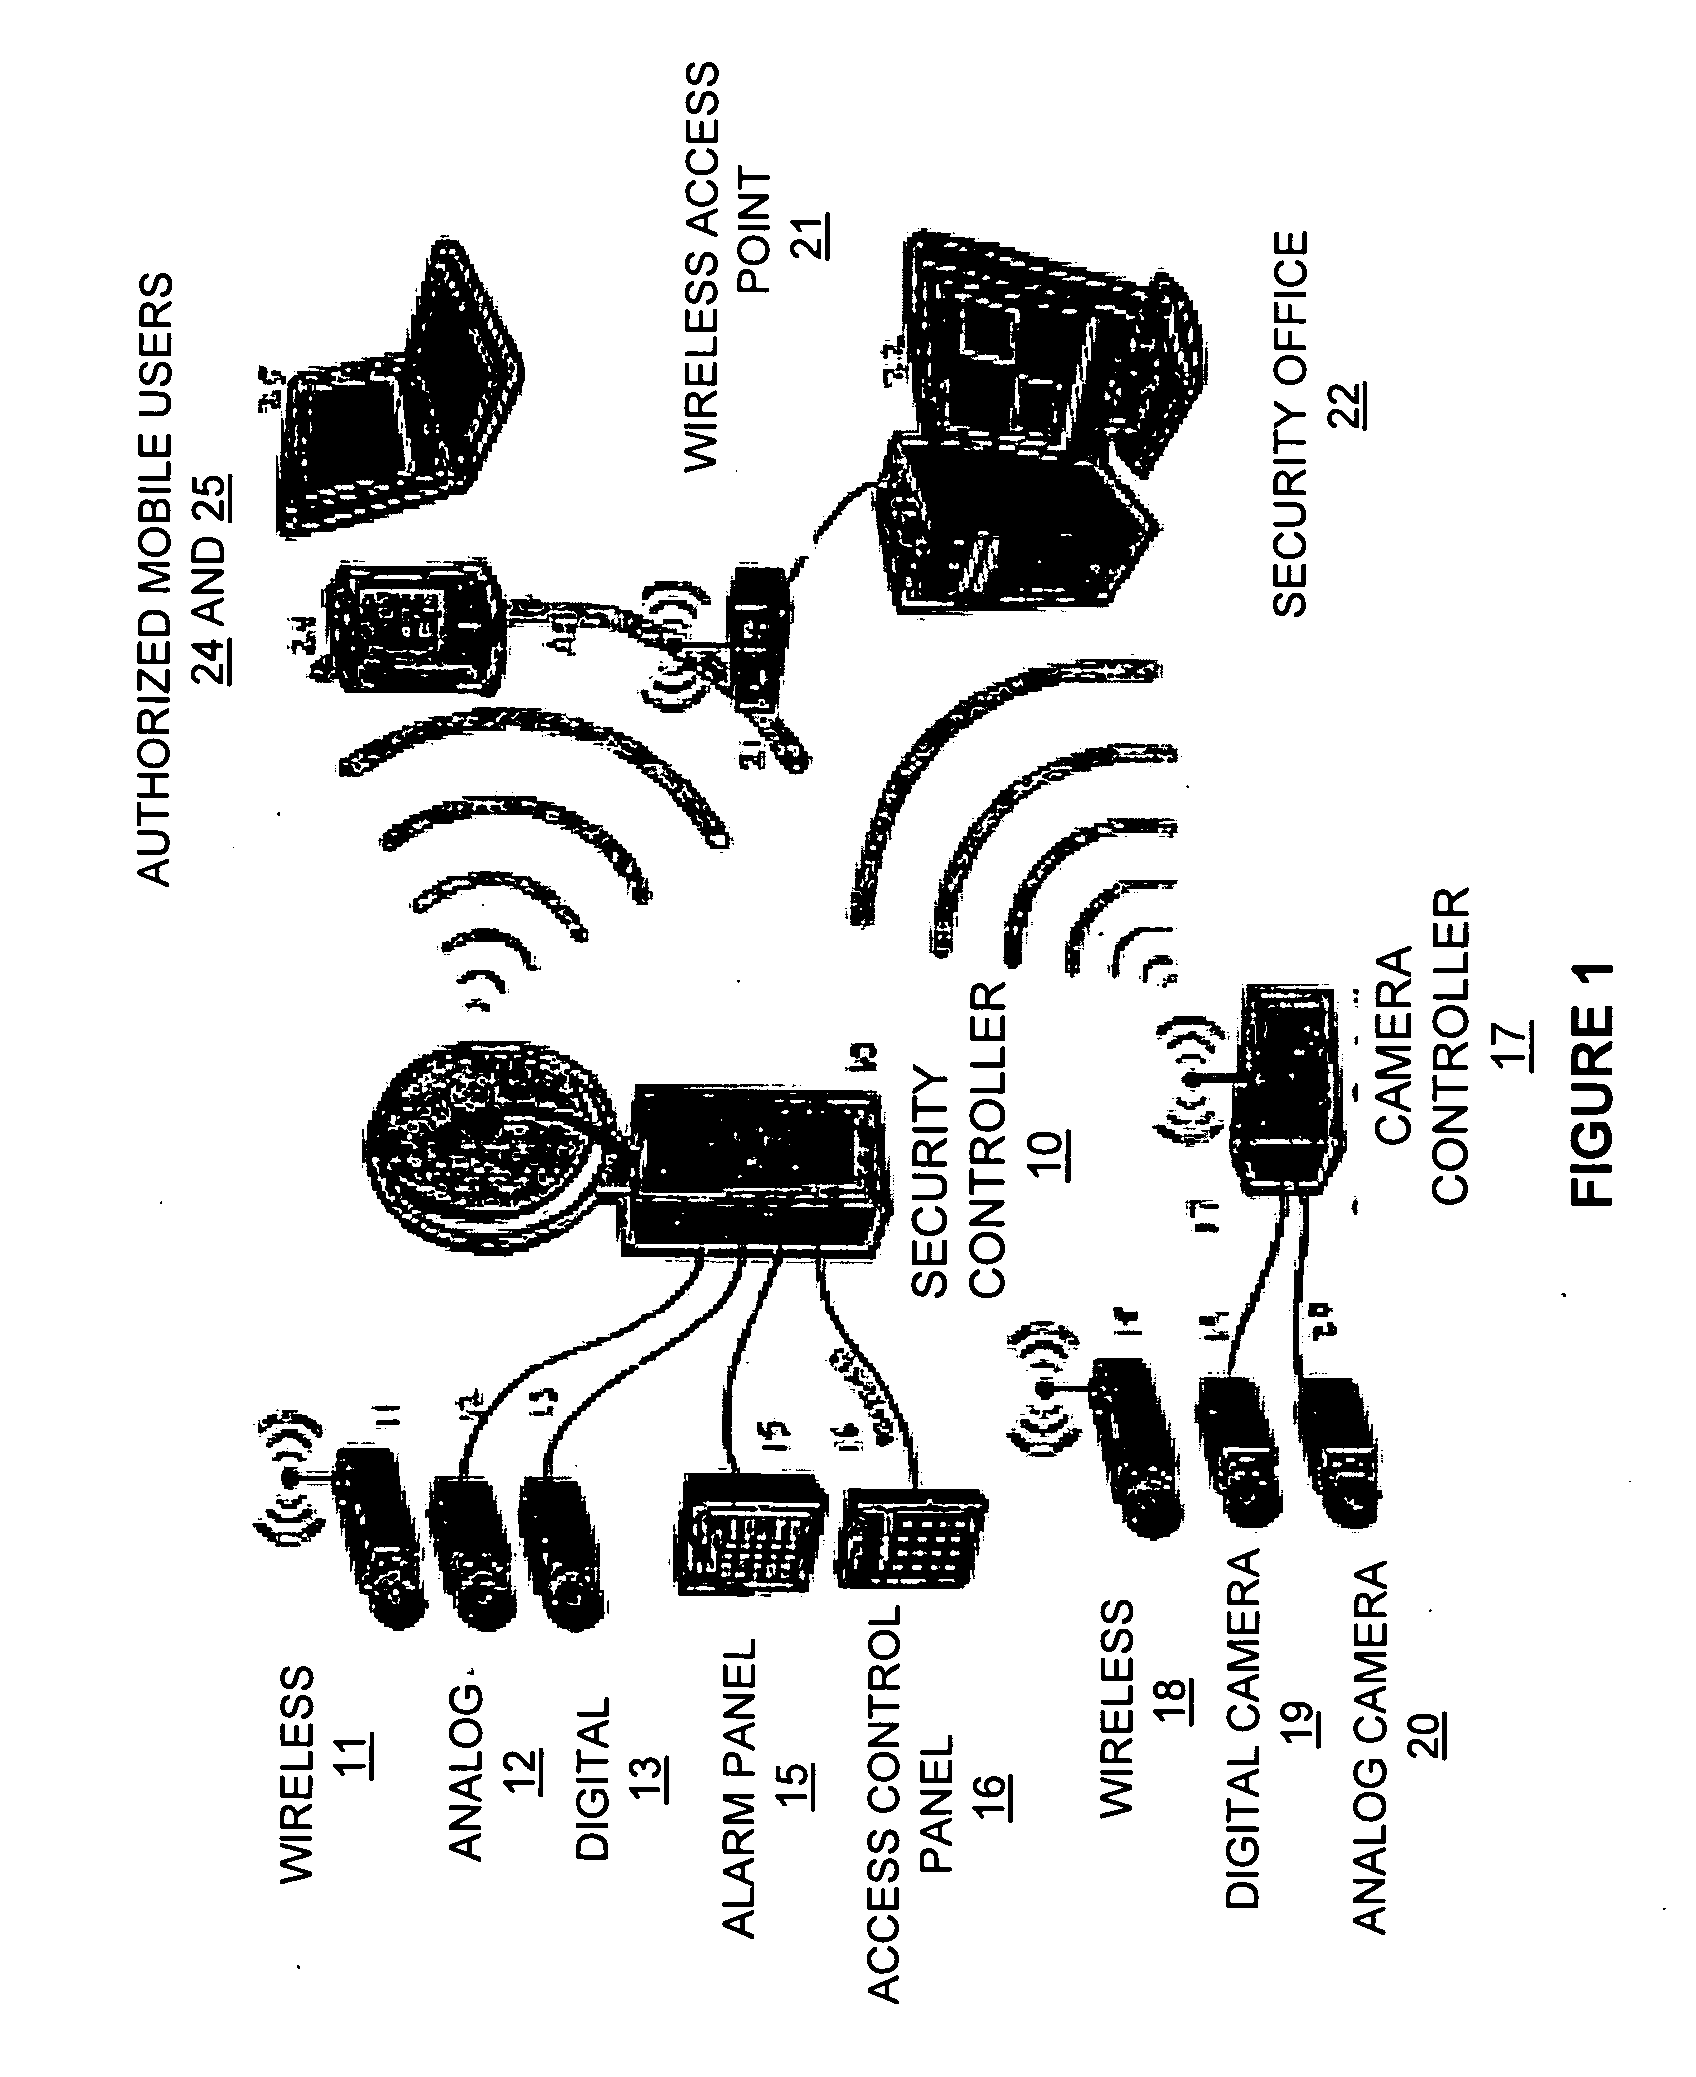 Wireless integrated security controller